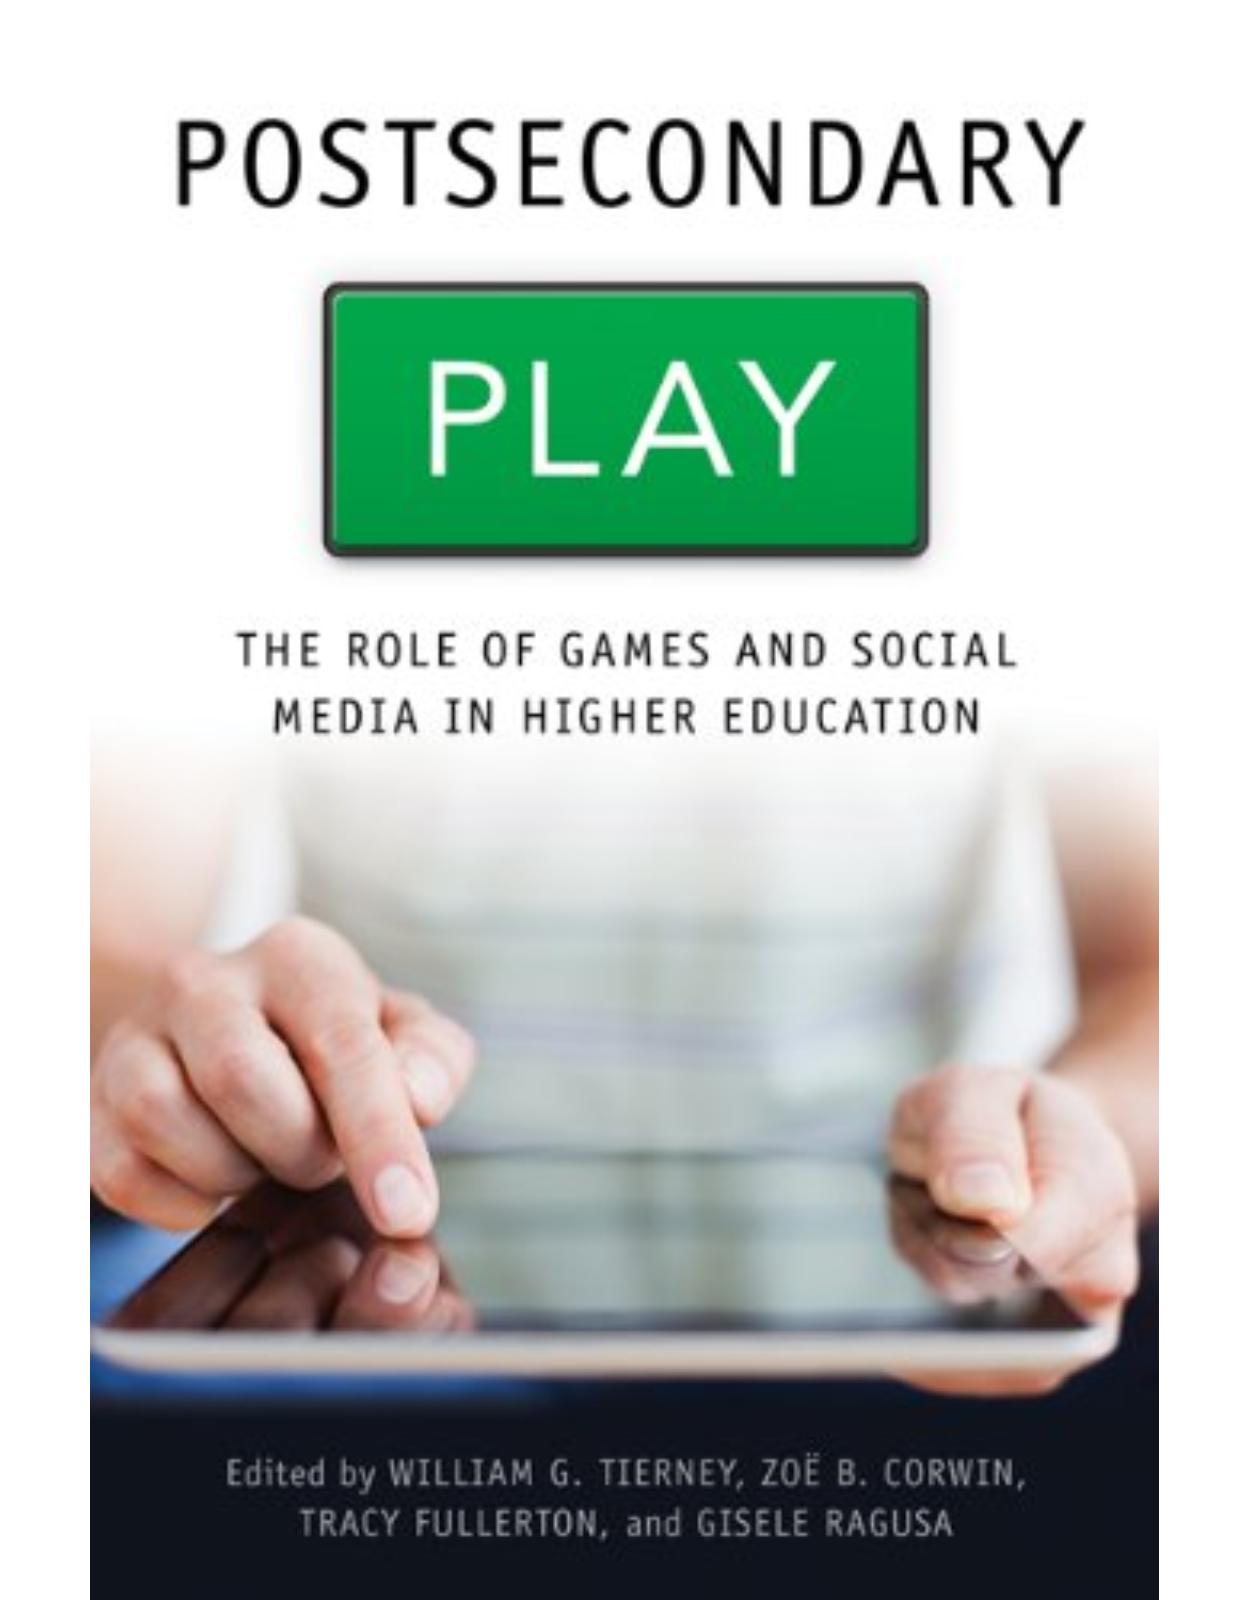 Postsecondary Play, The Role of Games and Social Media in Higher Education